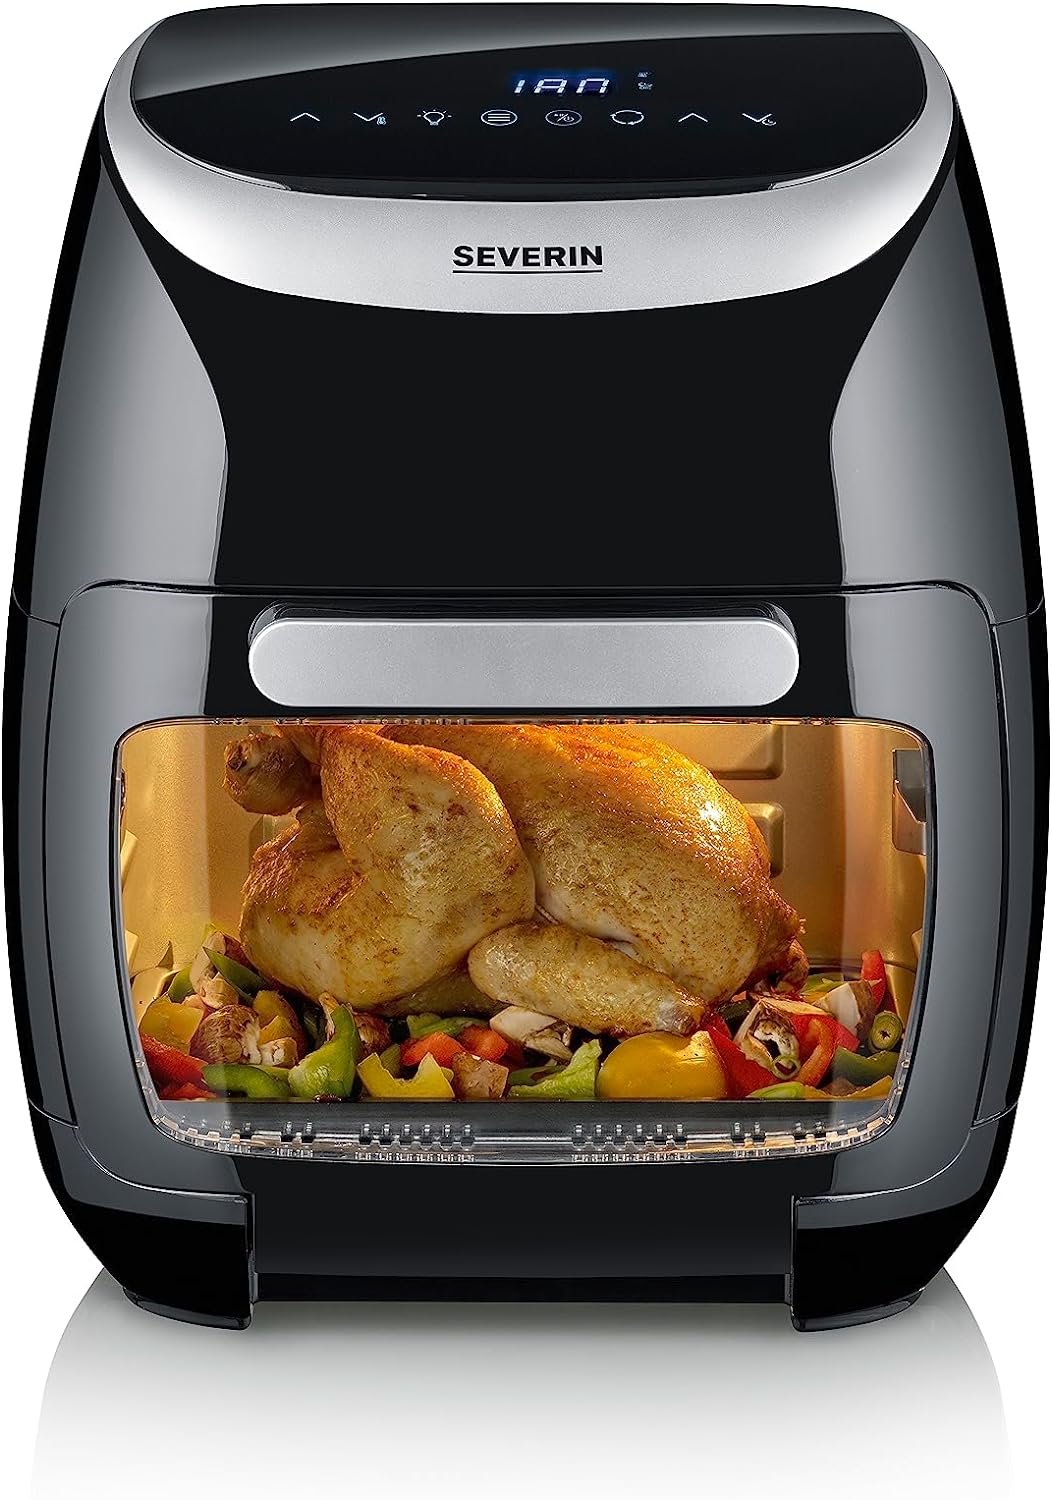 SEVERIN Multi Hot Air Fryer with 11 Litre Capacity, Hot Air Fryer with Extensive Accessories, Fryer without Grease with 8 Automatic Programmes, 2000 W, Black/Silver, FR 2446